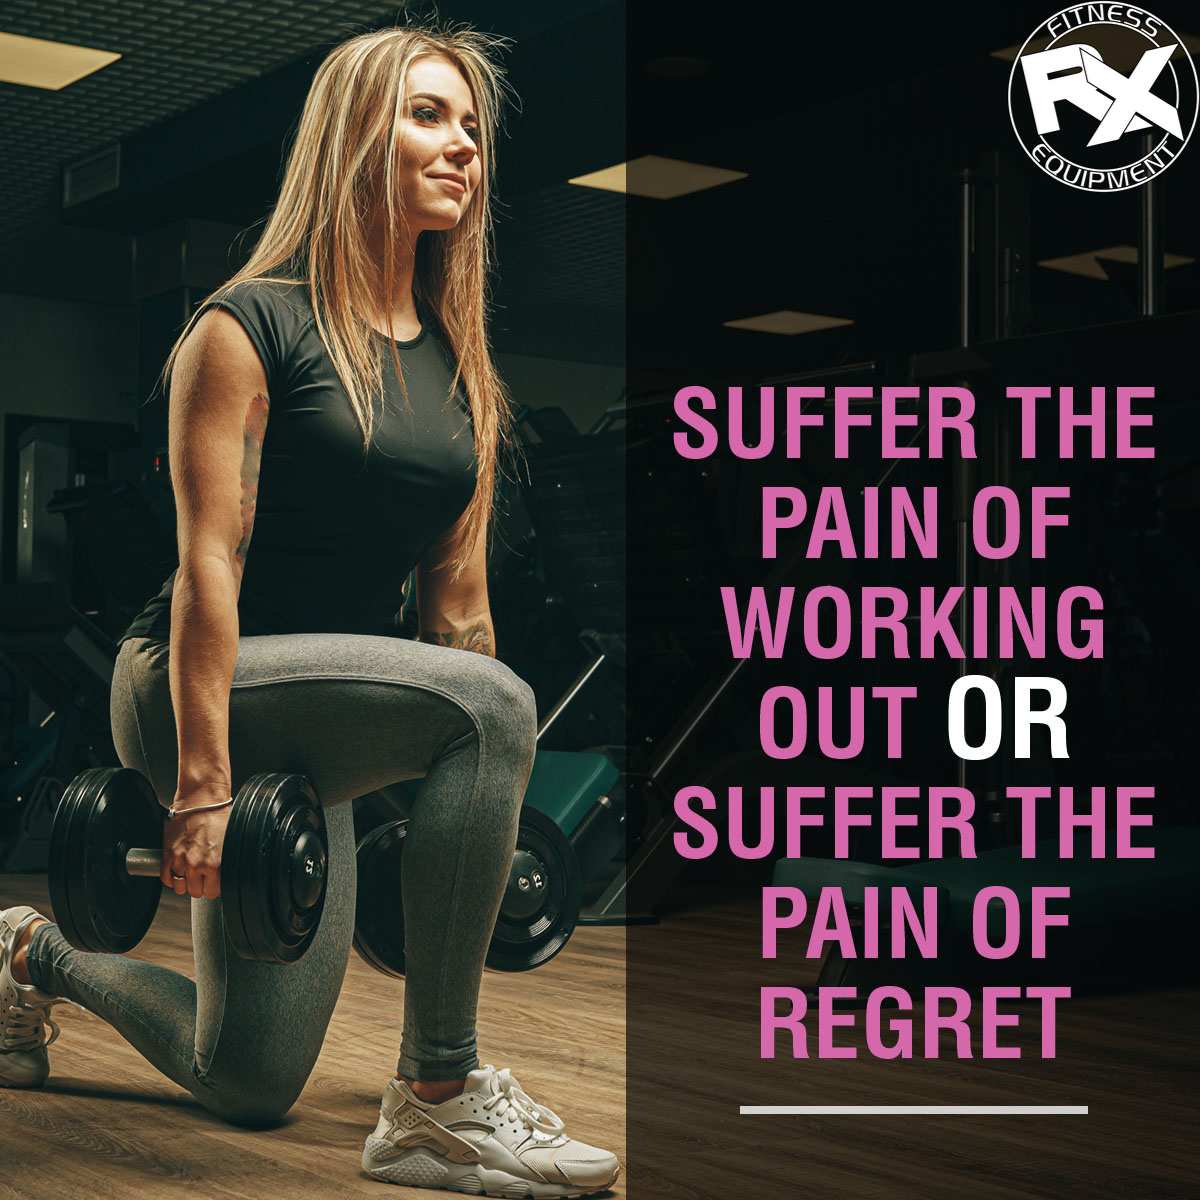 Regret is not fun, so work through the pain and watch your momentum grow! #rxfitnessequipment #fitnessequipment #exerciseequipment #strengthtraining #fitnessgoals #fitnessmotivation #fitfam #personaltrainer #getfit #instafitness